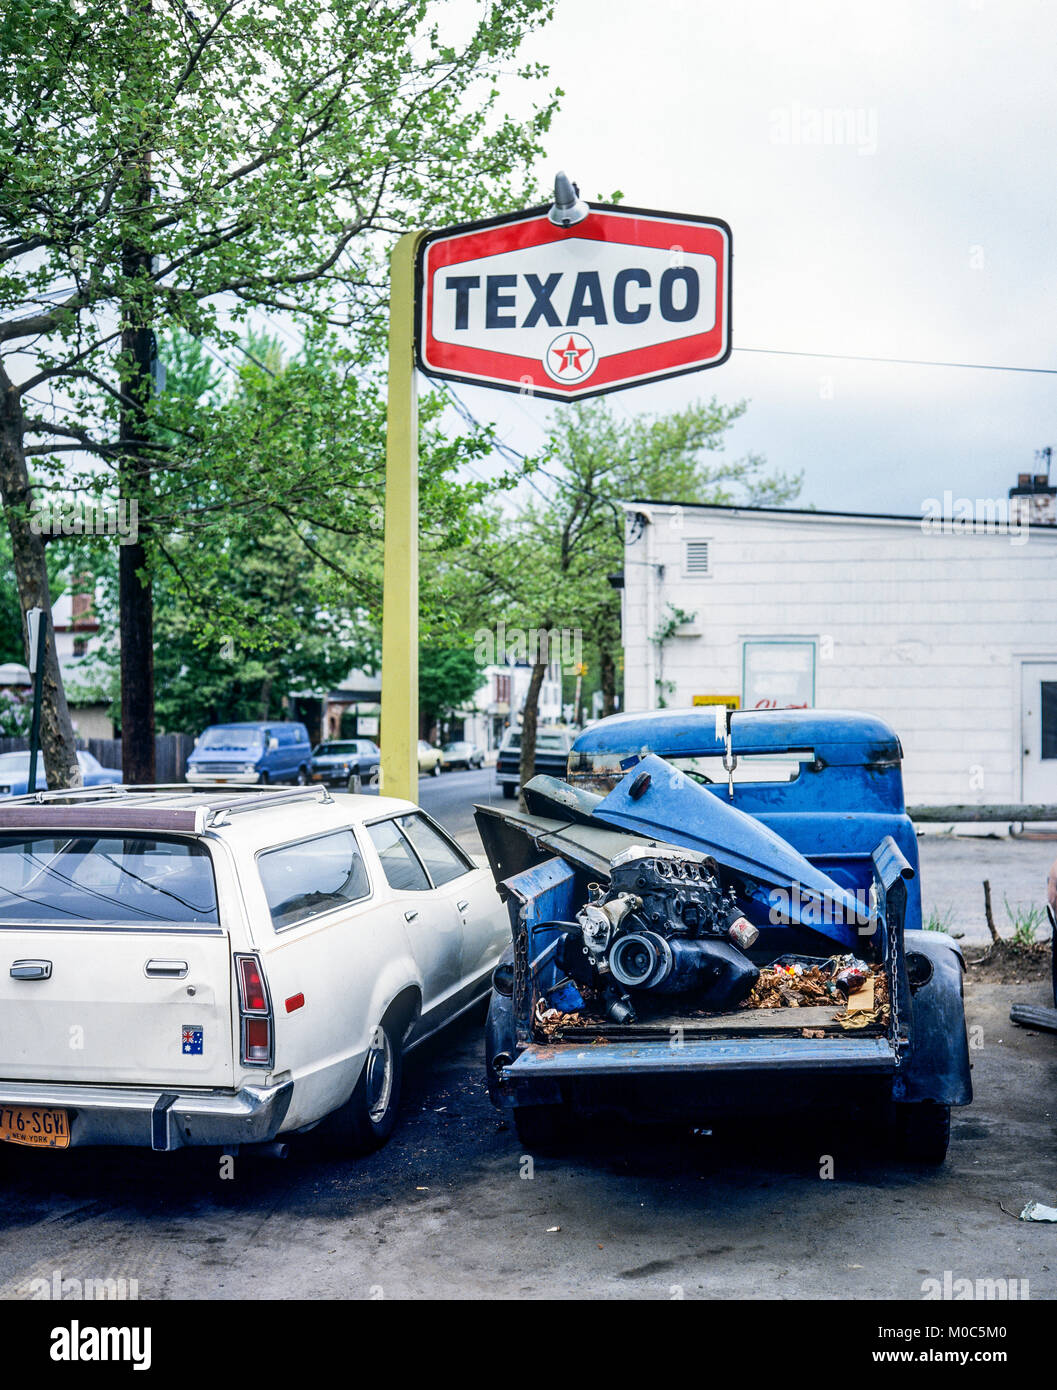 May 1982, parked cars, car engine and parts in trunk, pick-up truck, Texaco petrol station, Long Island, New york, NY, USA, Stock Photo